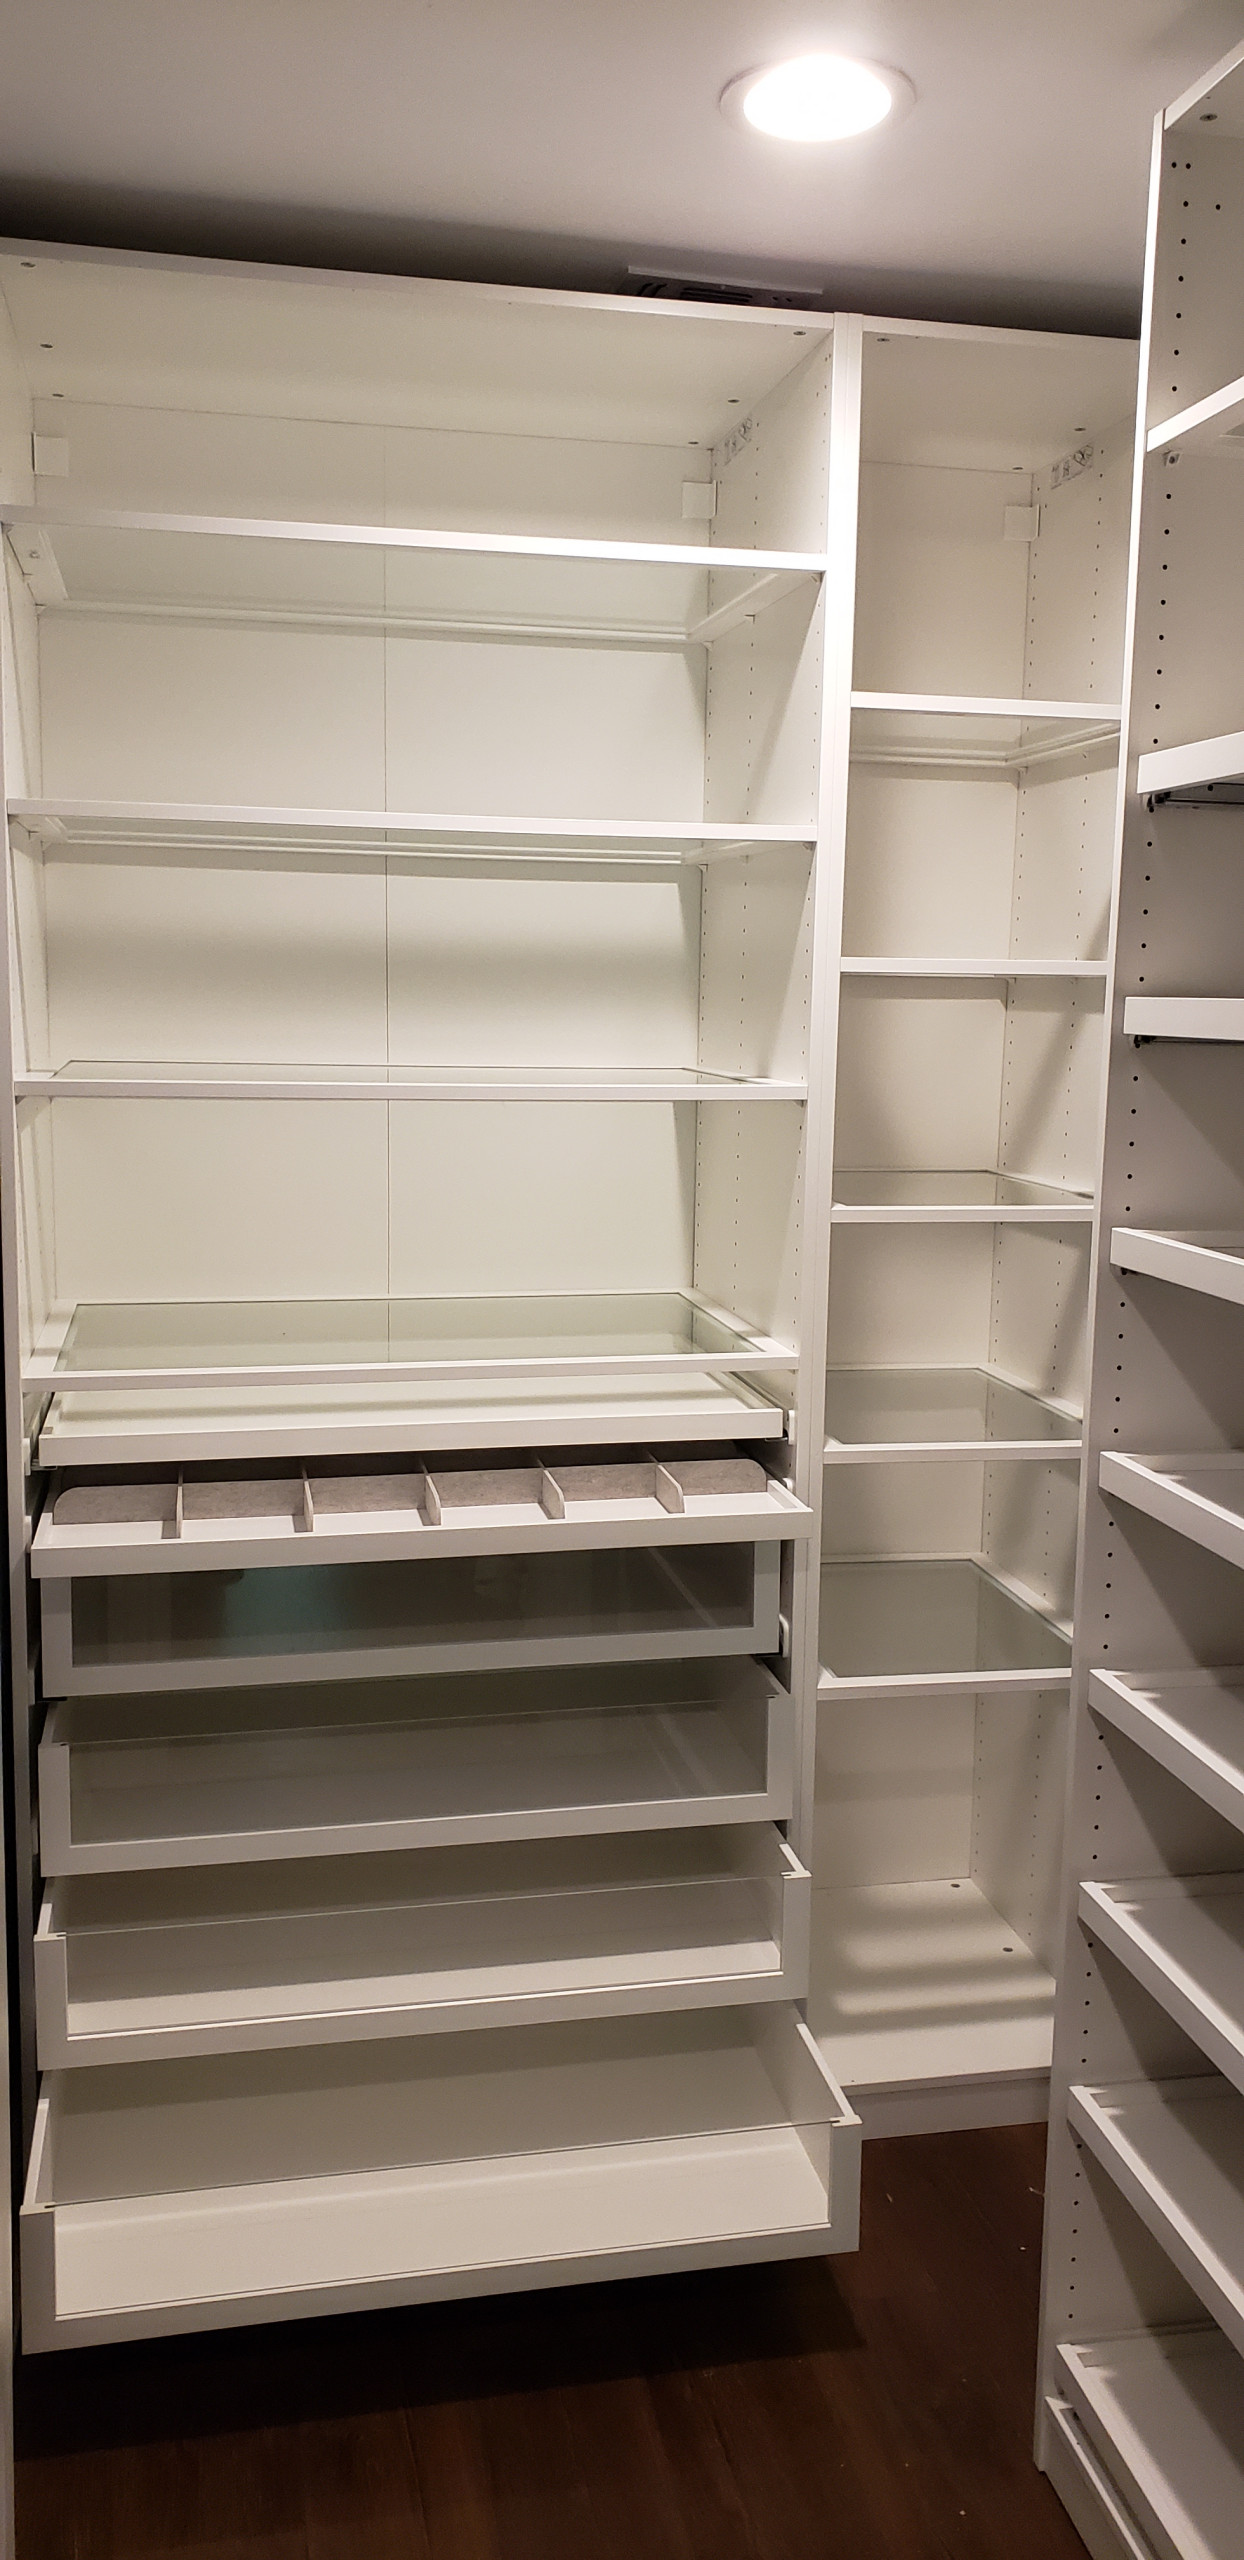 Before And After: IKEA Closet Installation - A Taste of Koko